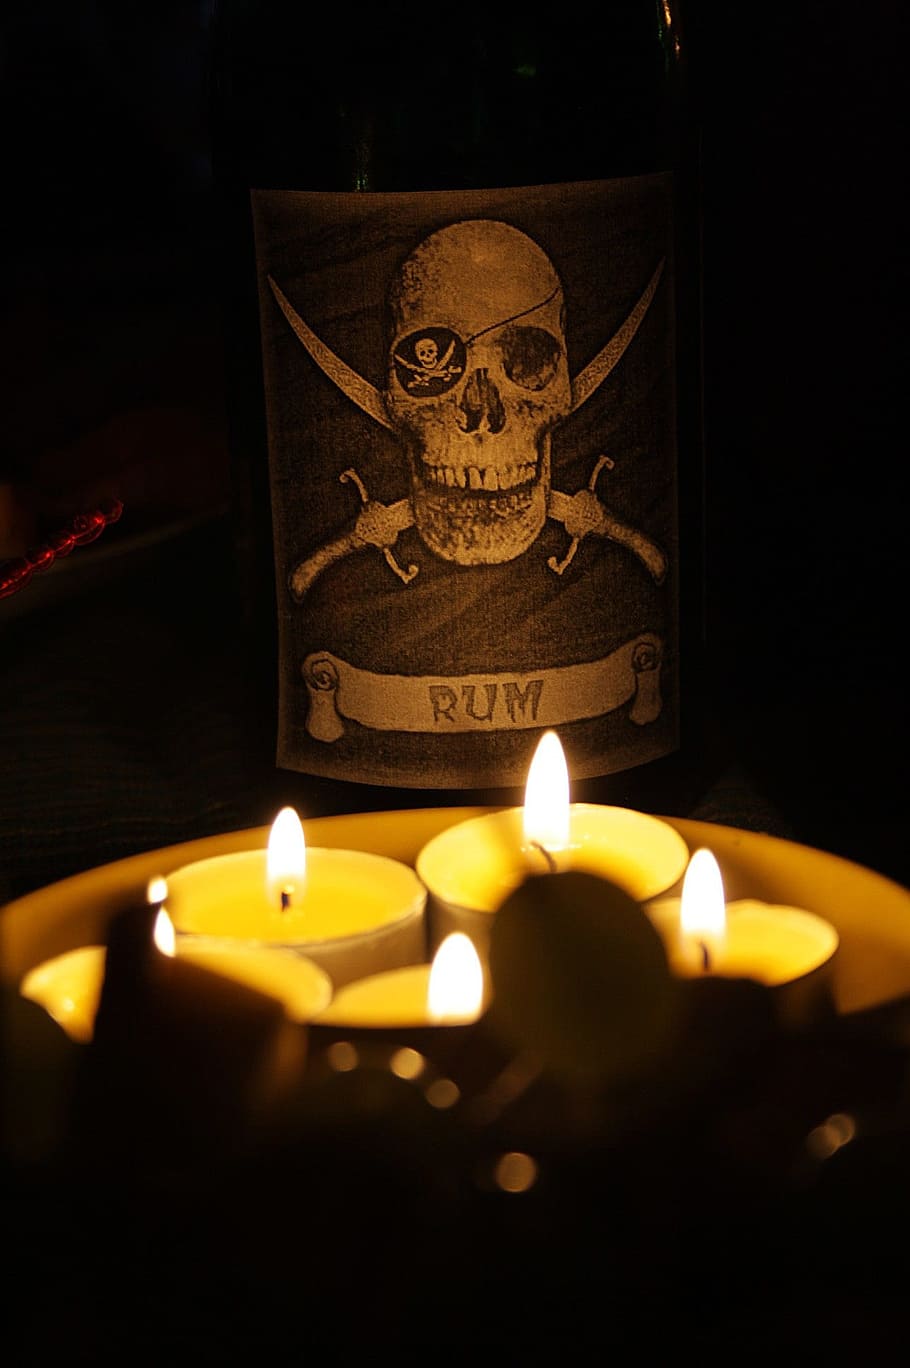 pirates of the, candle, pirate treasure, romance, evening, skull, candles, adventure, burning, flame